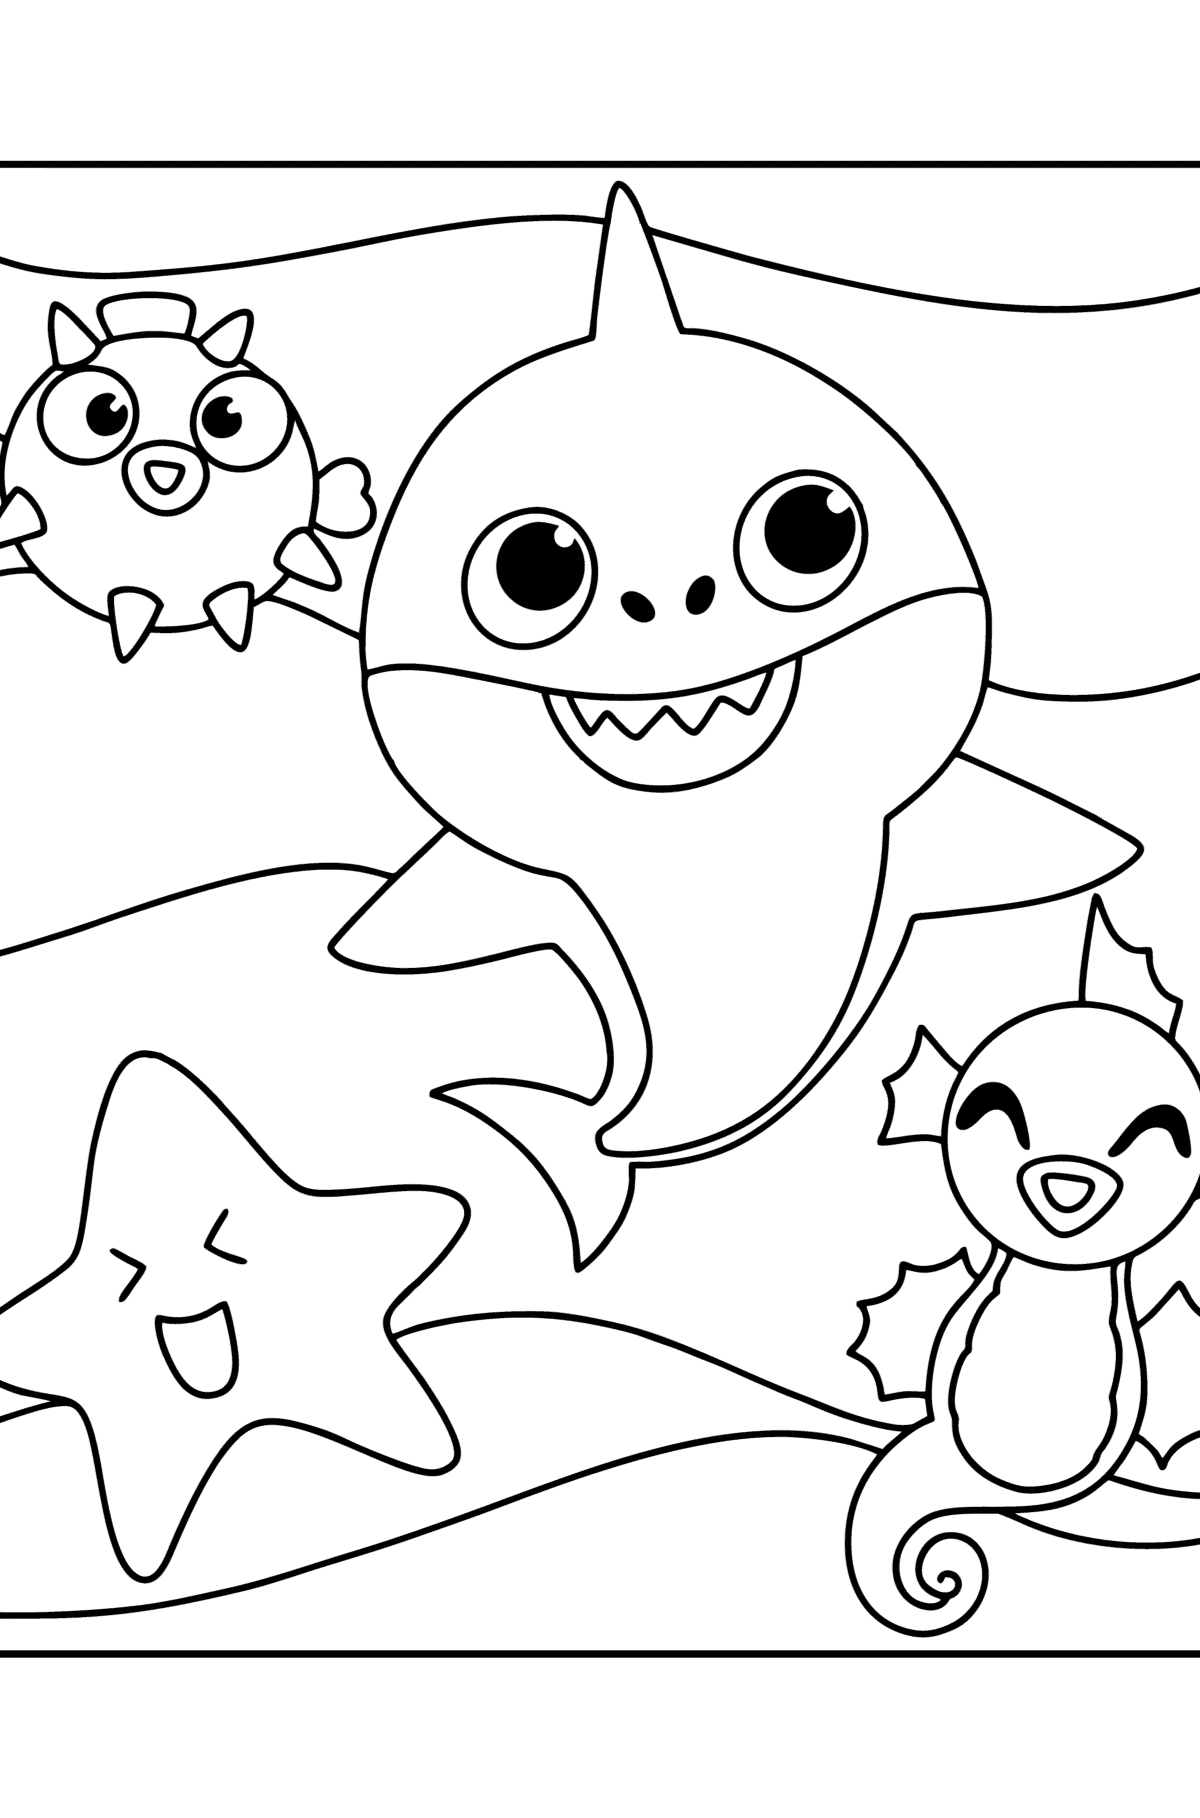 Friends Baby shark coloring page - Coloring Pages for Kids